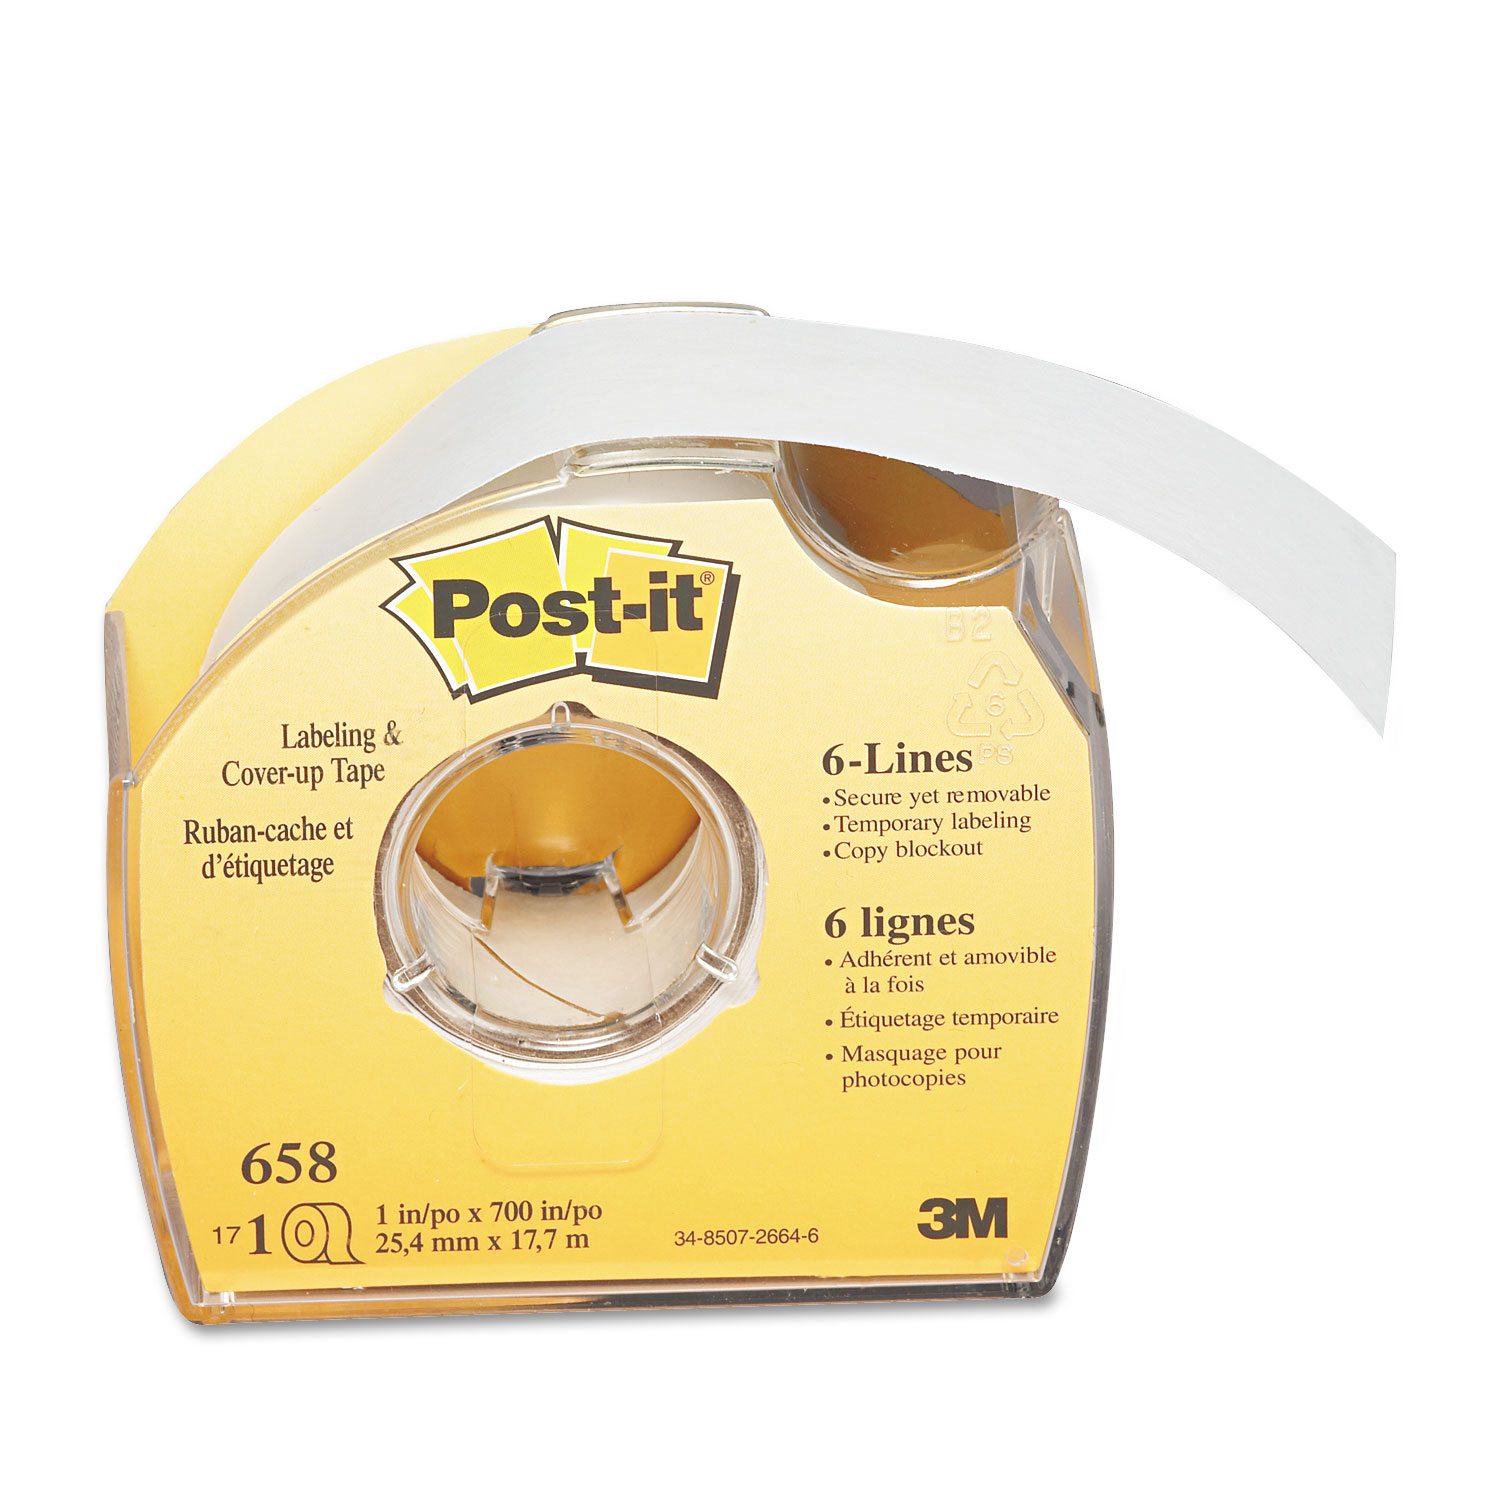  Post-it 658 Labeling & Cover-Up Tape, Non-Refillable, 1 x 700 Roll (MMM658) 